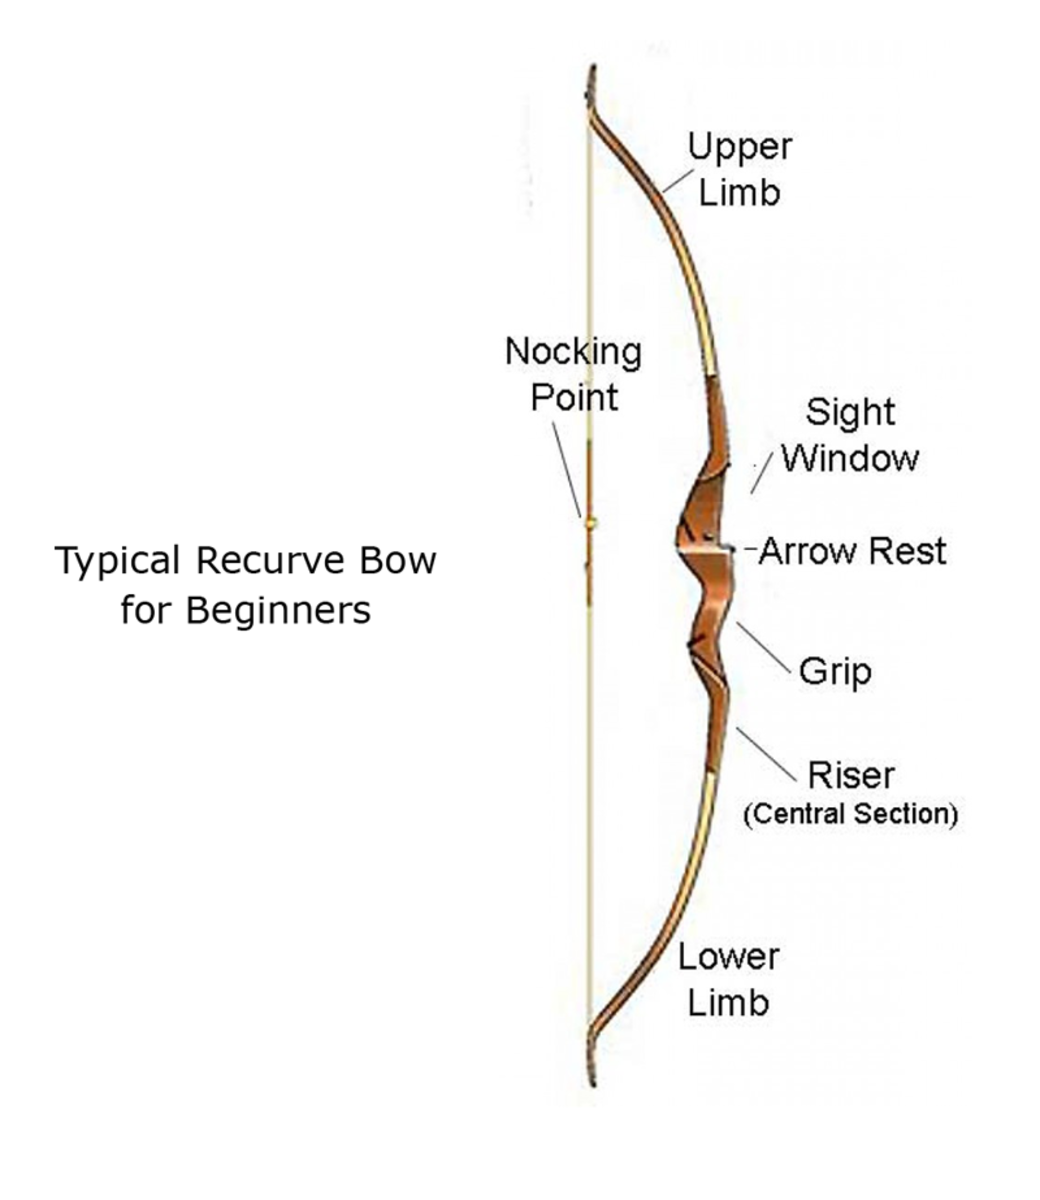 Typical Recurve Bow for Beginners